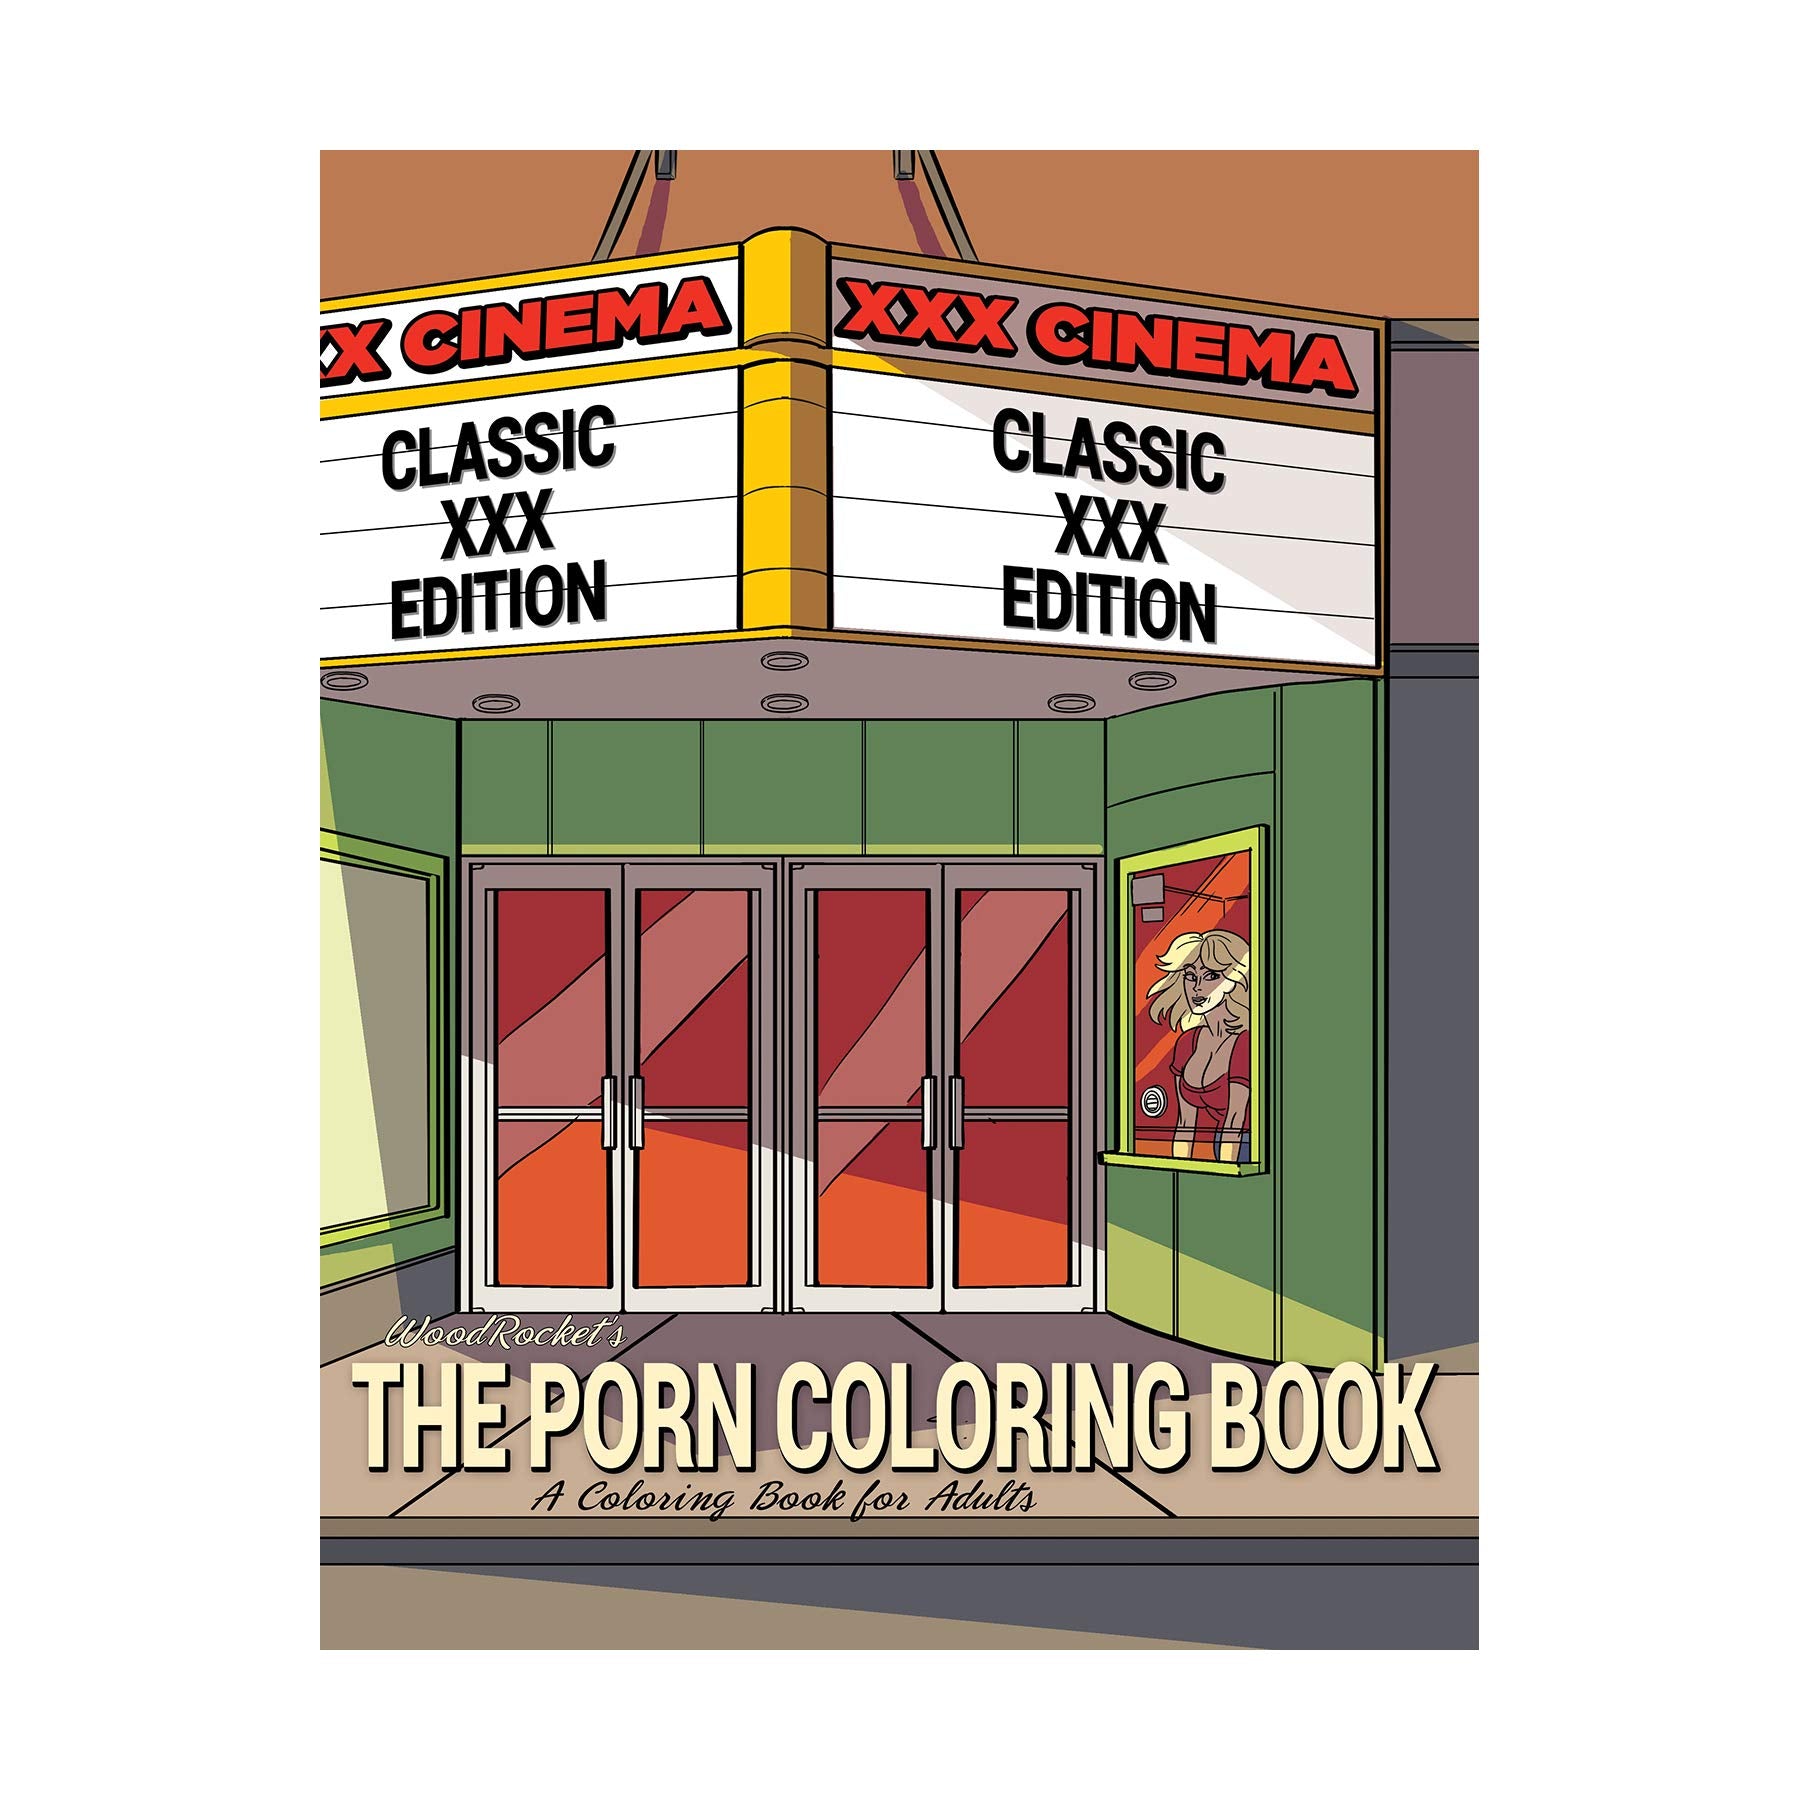 SALE: Wood Rocket, The Porn Coloring Book Classic XXX Edition, $19.99, FREE  SHIPPING